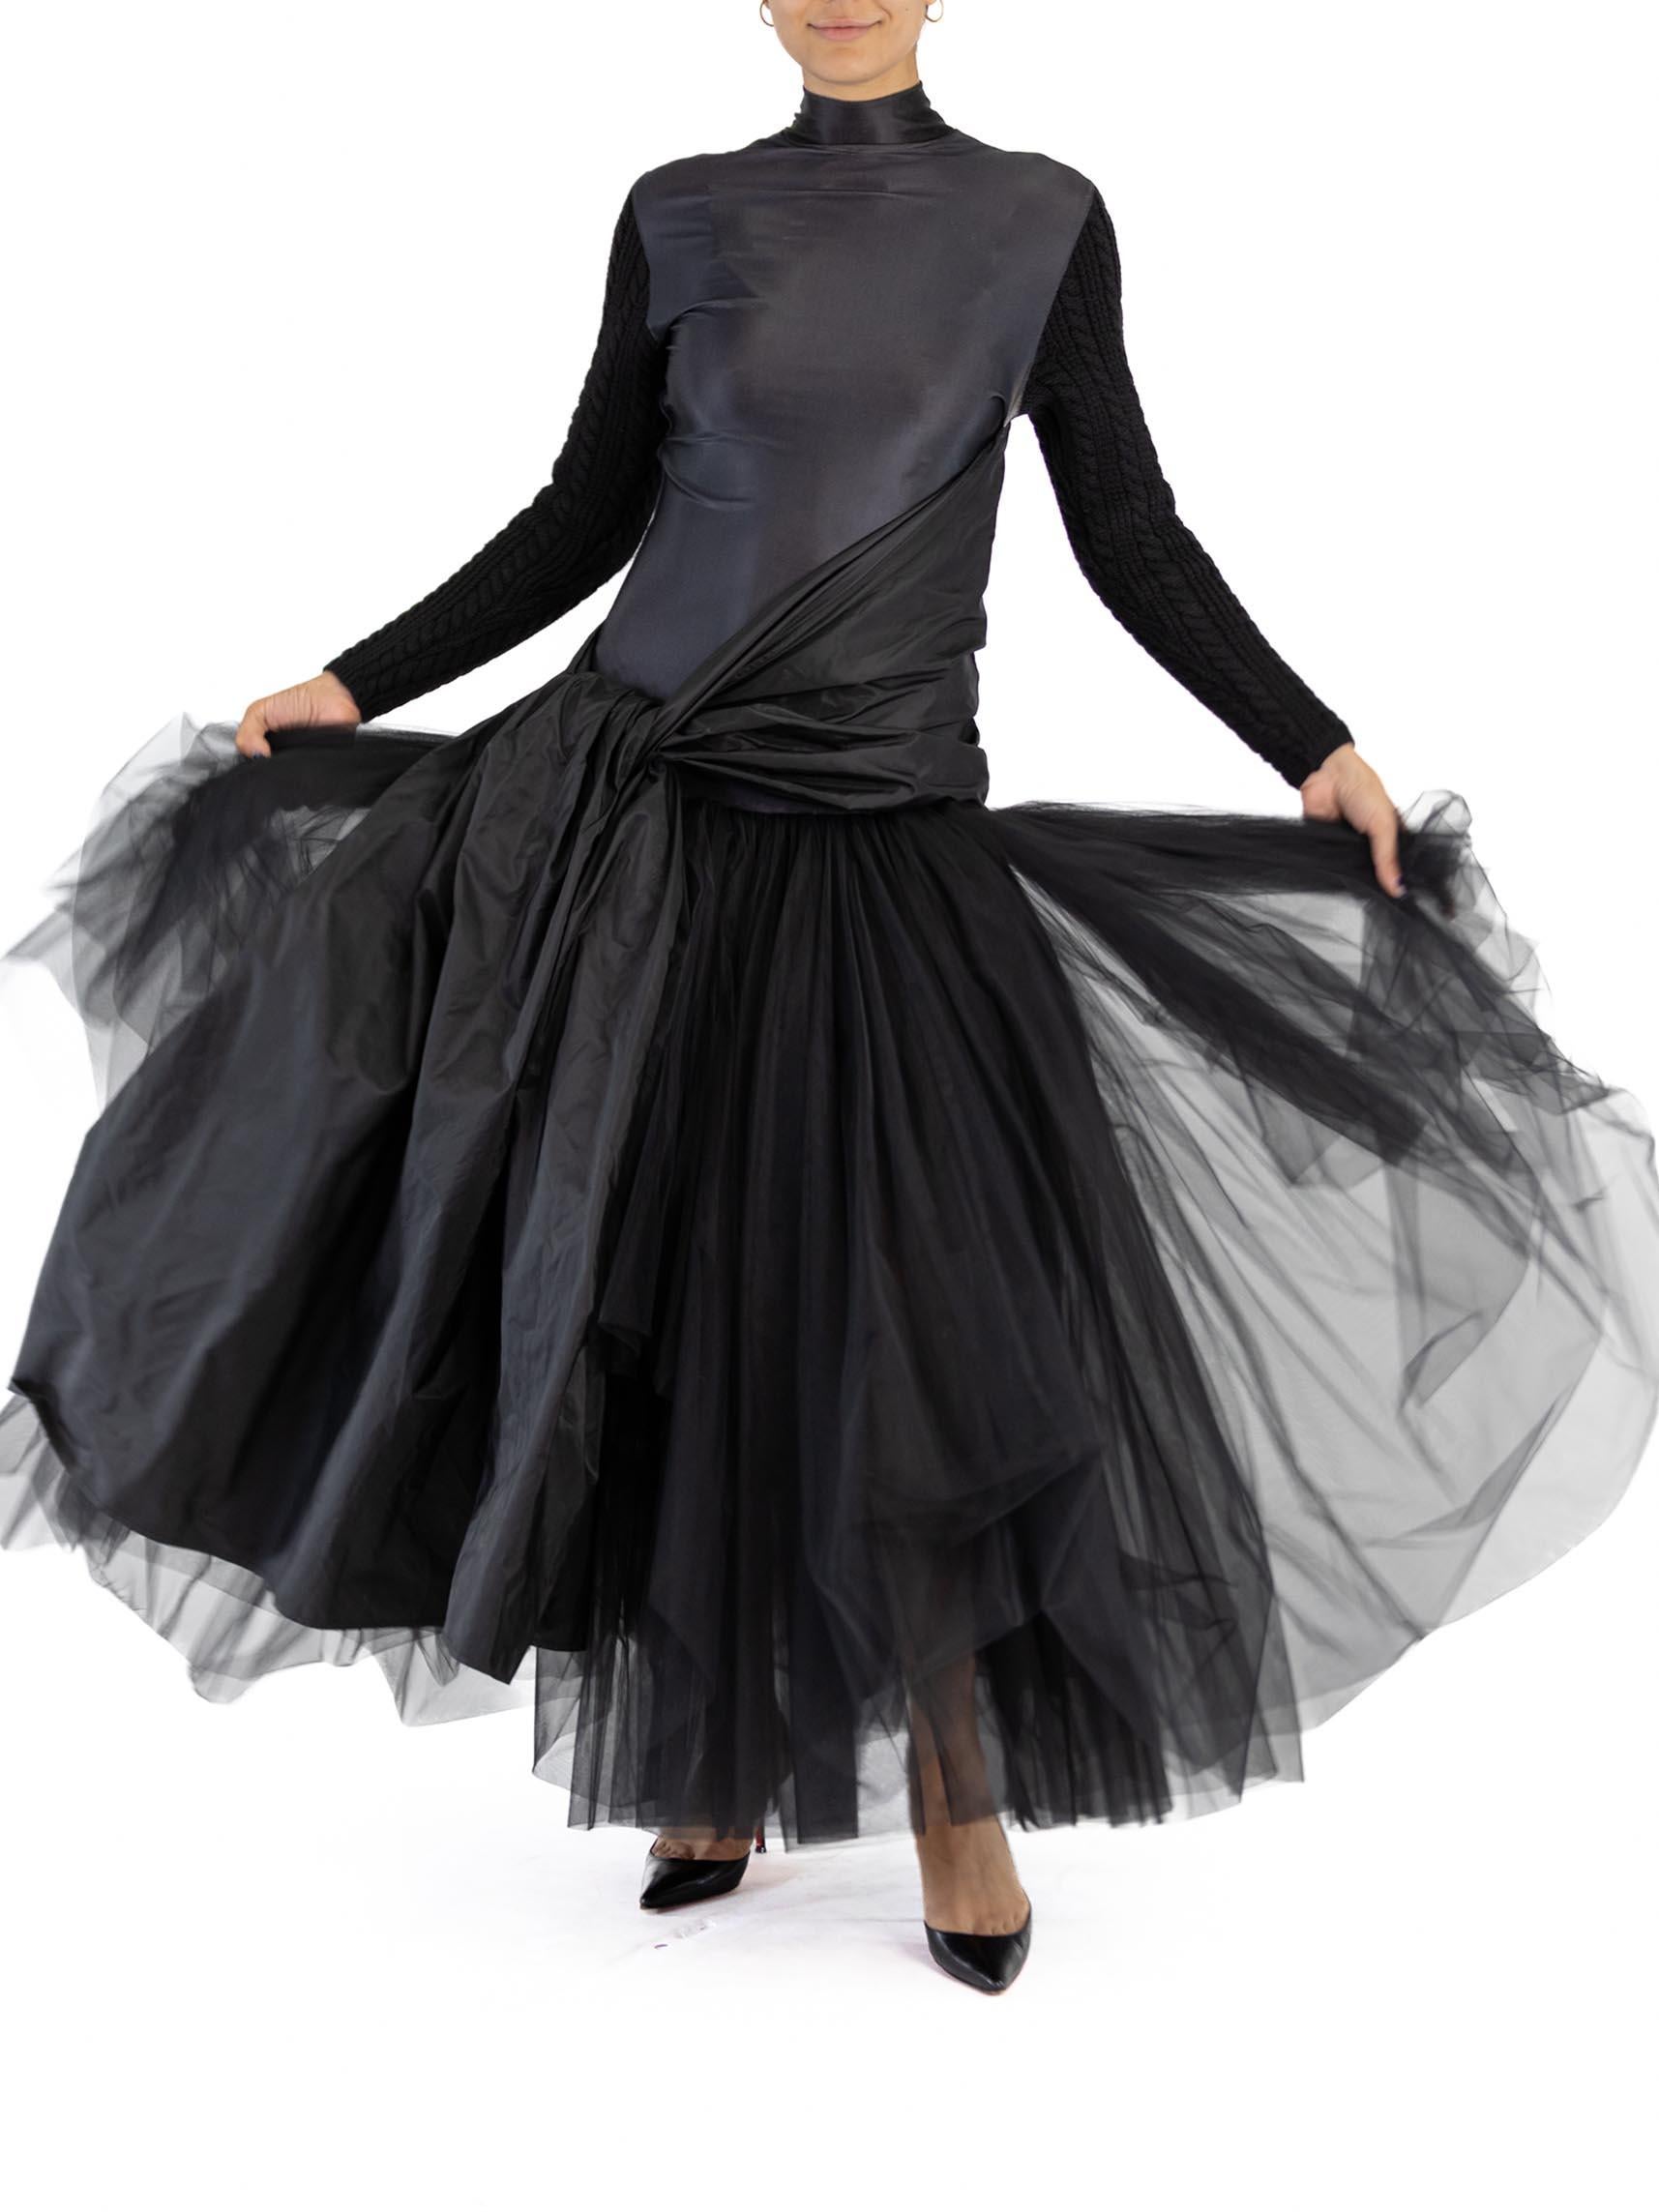 2000S JEAN PAUL GAULTIER Black Silk Knit Sleeves & Tulle Skirt Gown For Sale 6